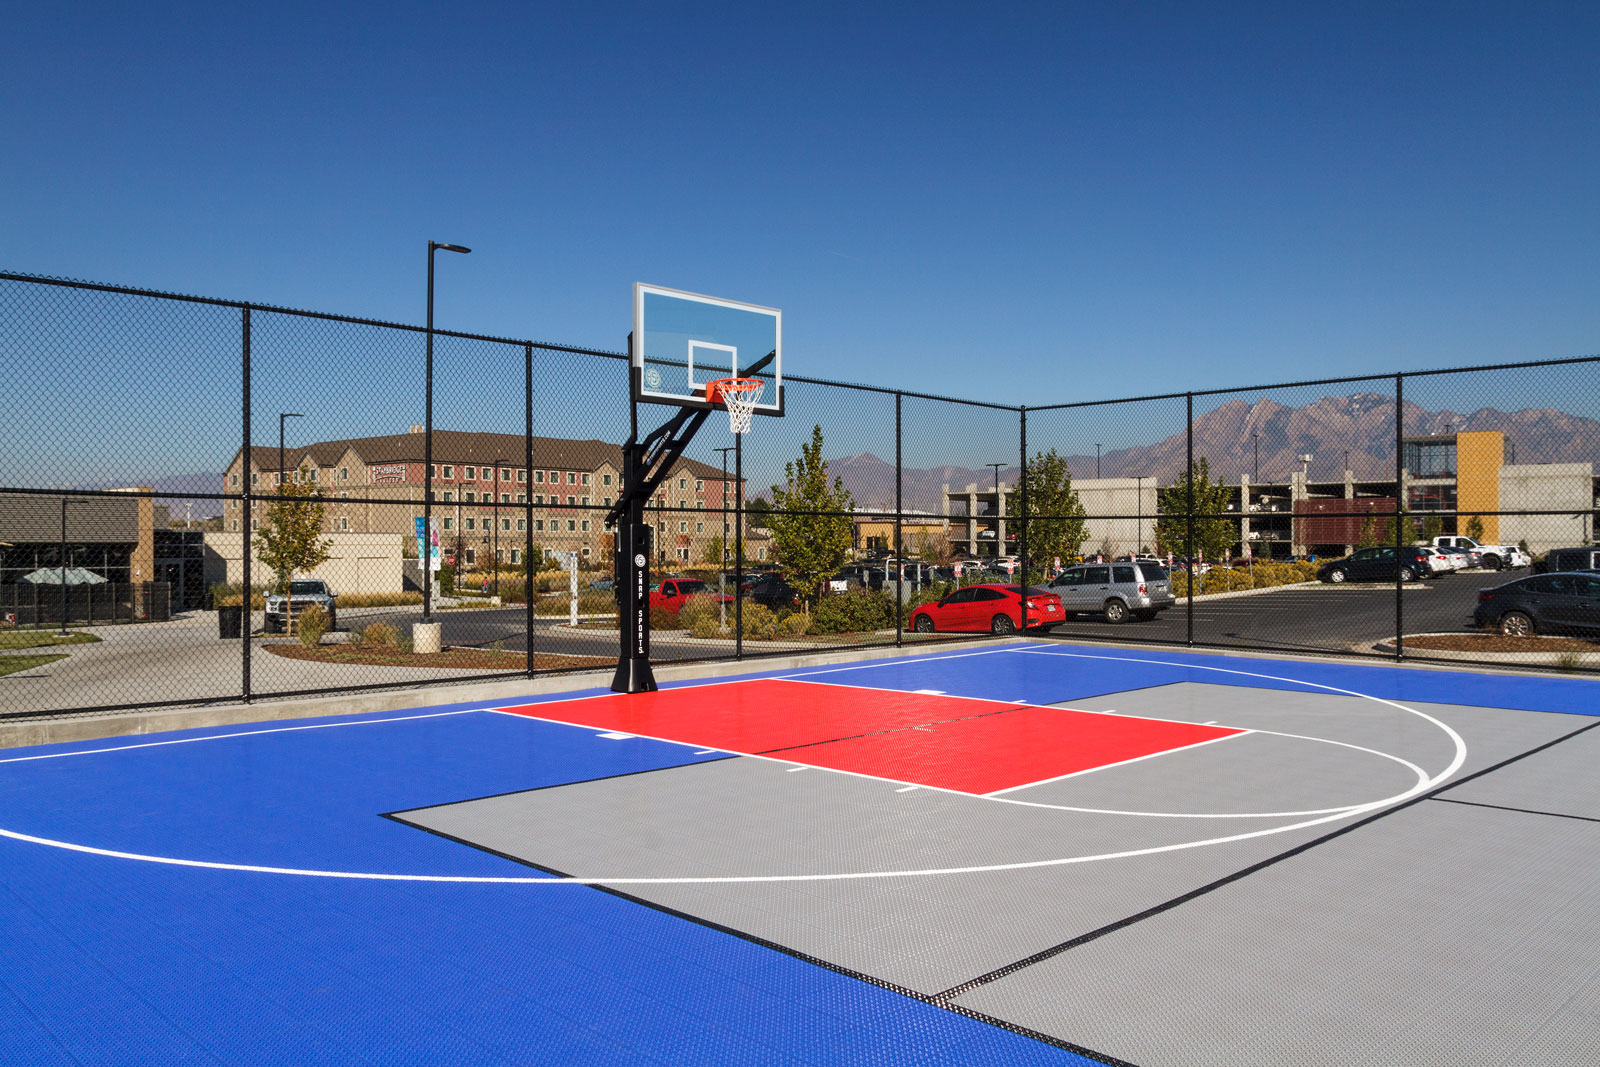 View of a basketball hoop in the Overstock.com multi-court